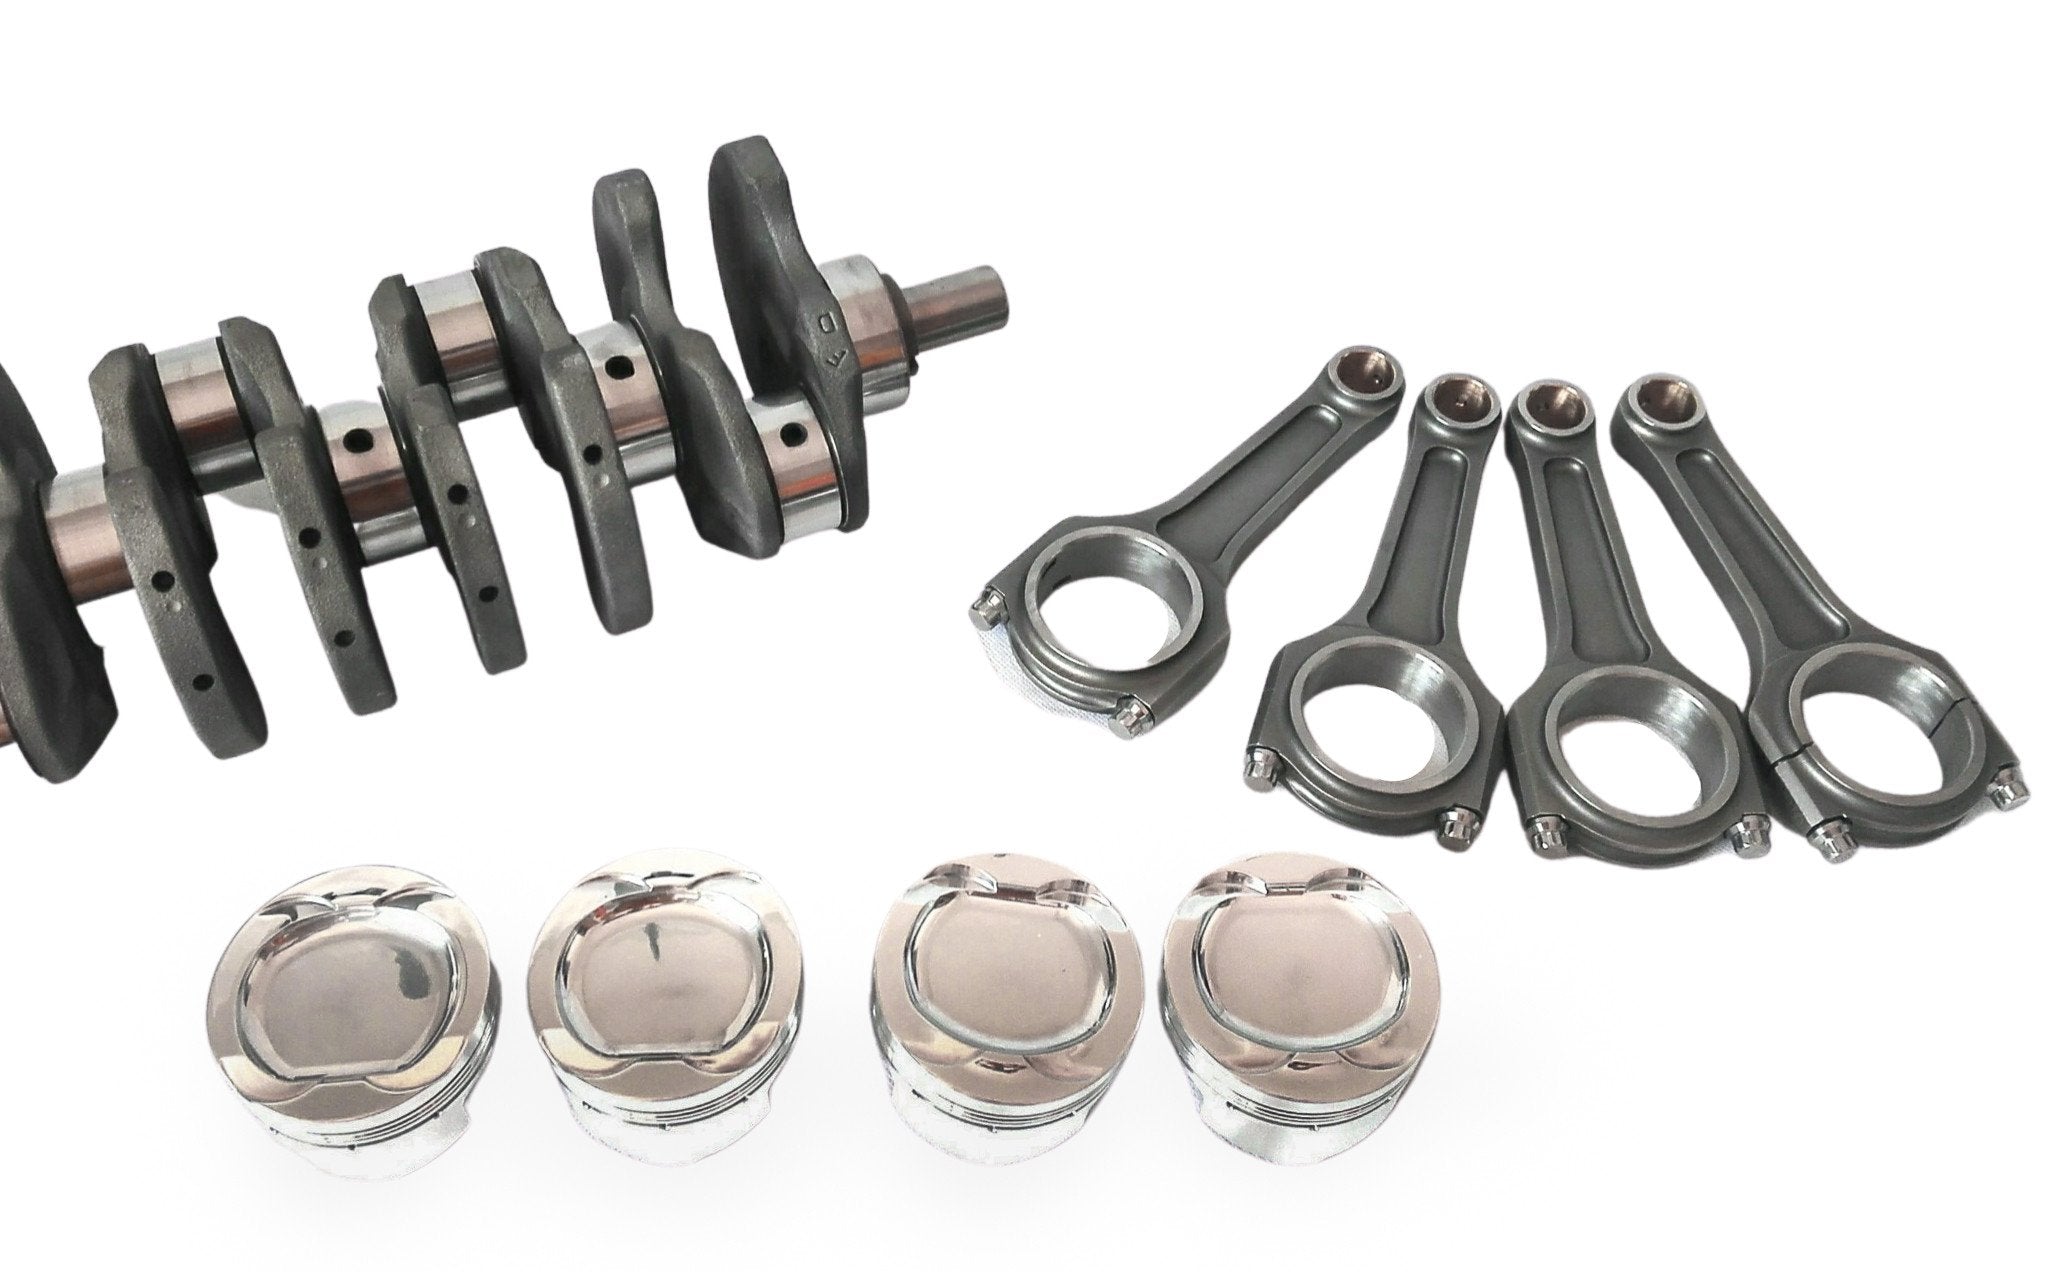 1.4 TSI Stroker Kit with Reconditioned Crankshaft - 1.400 to 1.600cc - BMY / CAX / CAV / CTH - RTMG Performance